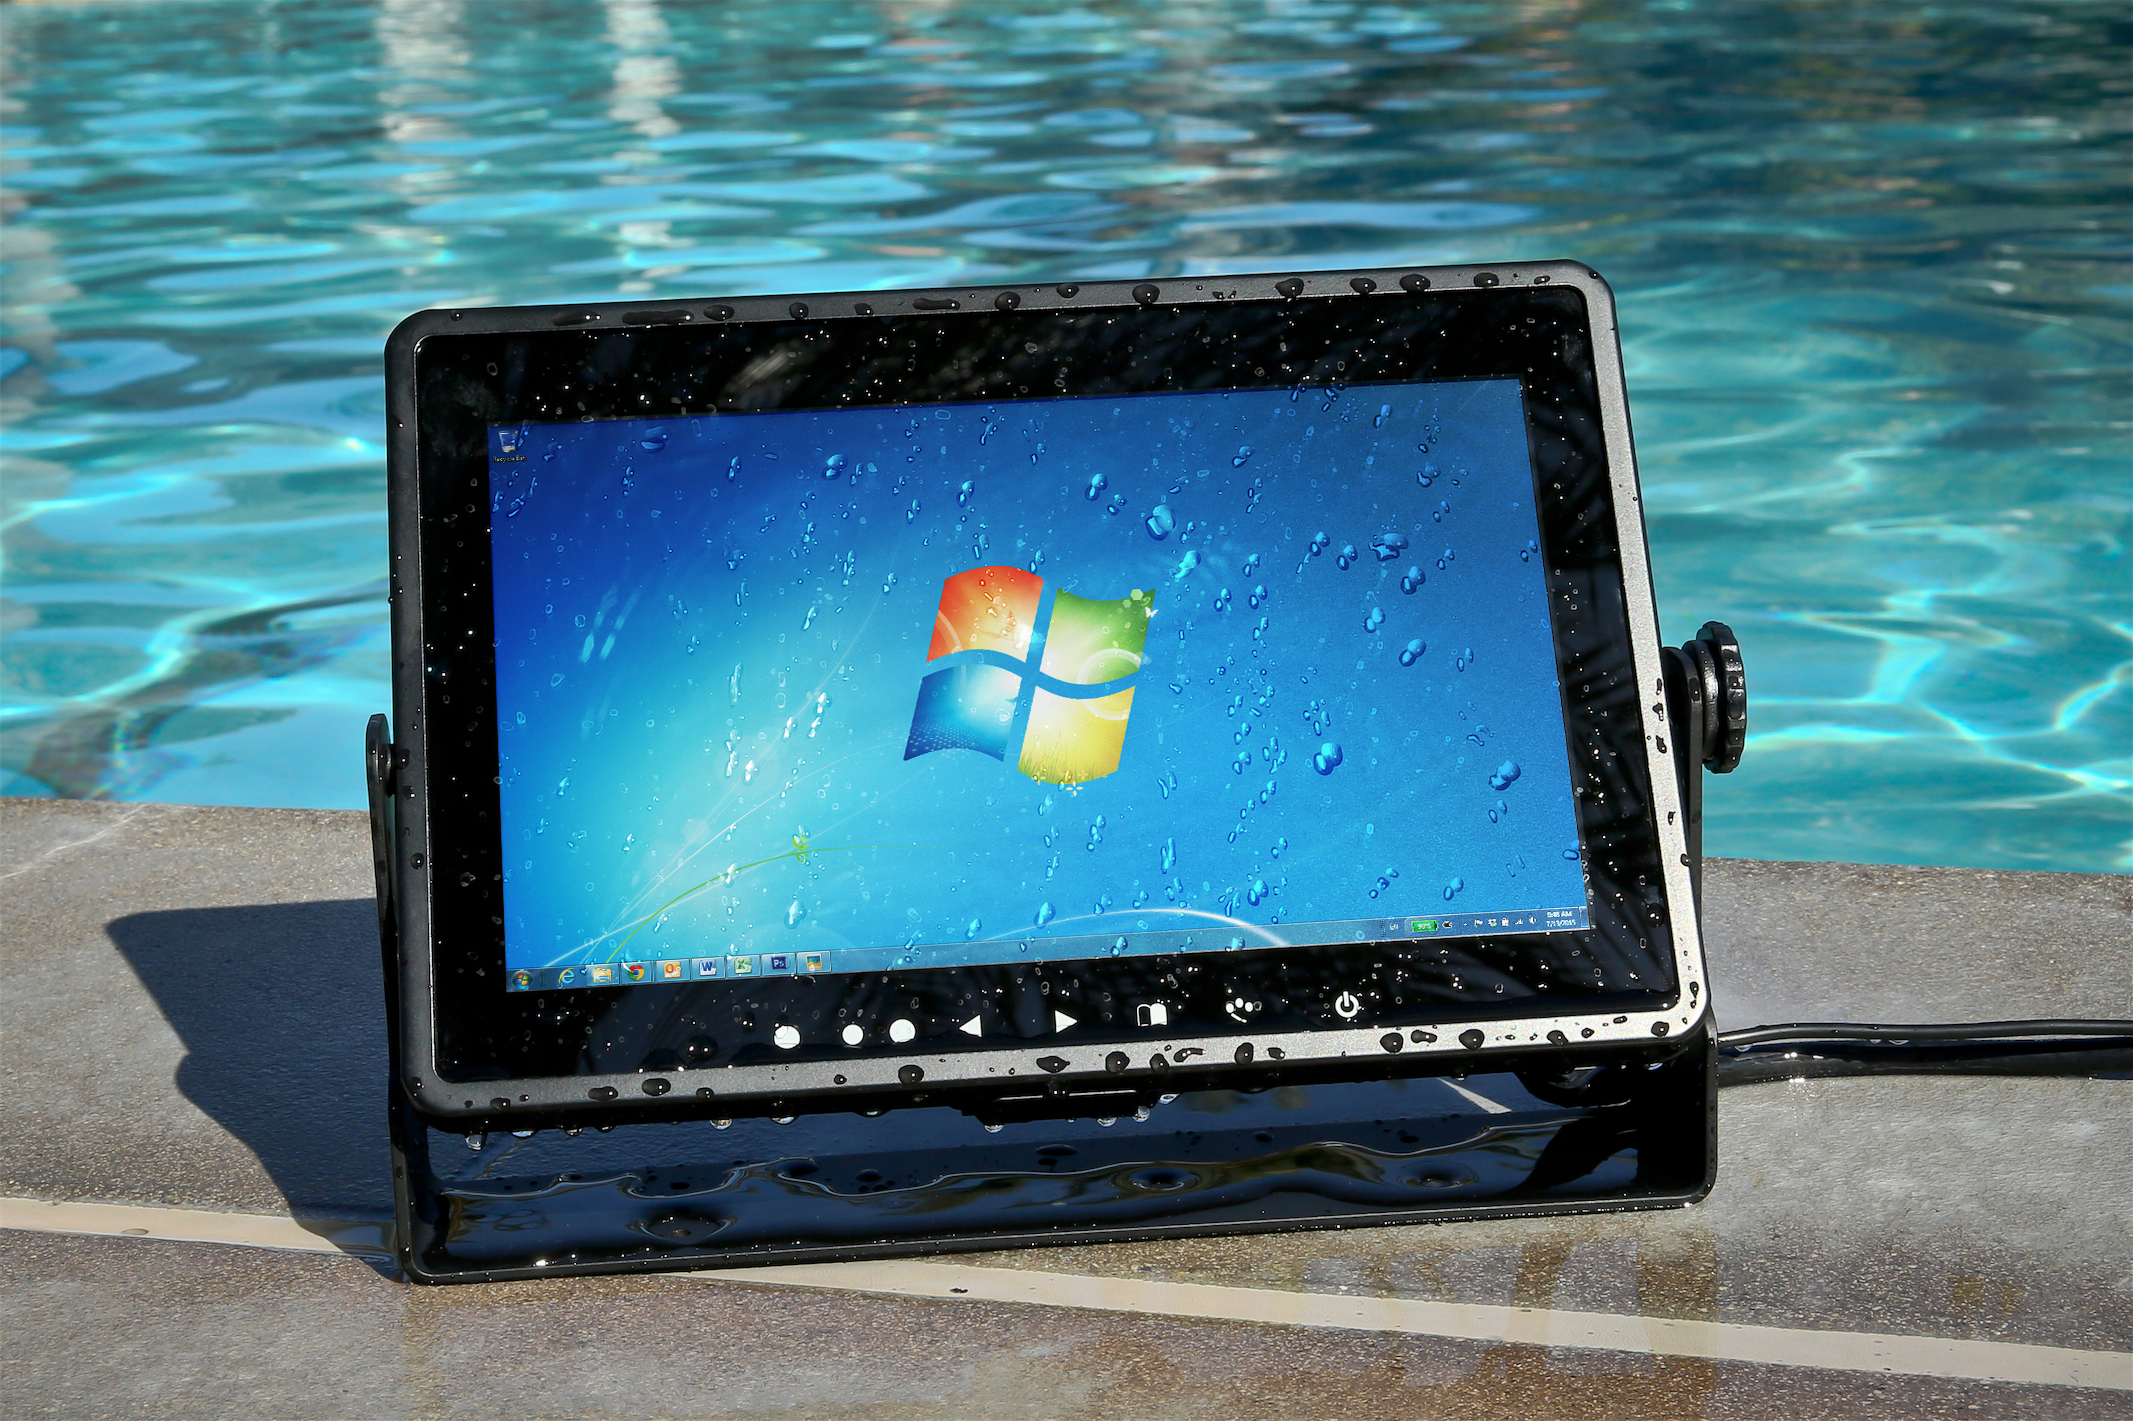 Ruggedized Marine Touch Screen Solutions for Watercraft Vessel & Commercial Vessel Manufacturers